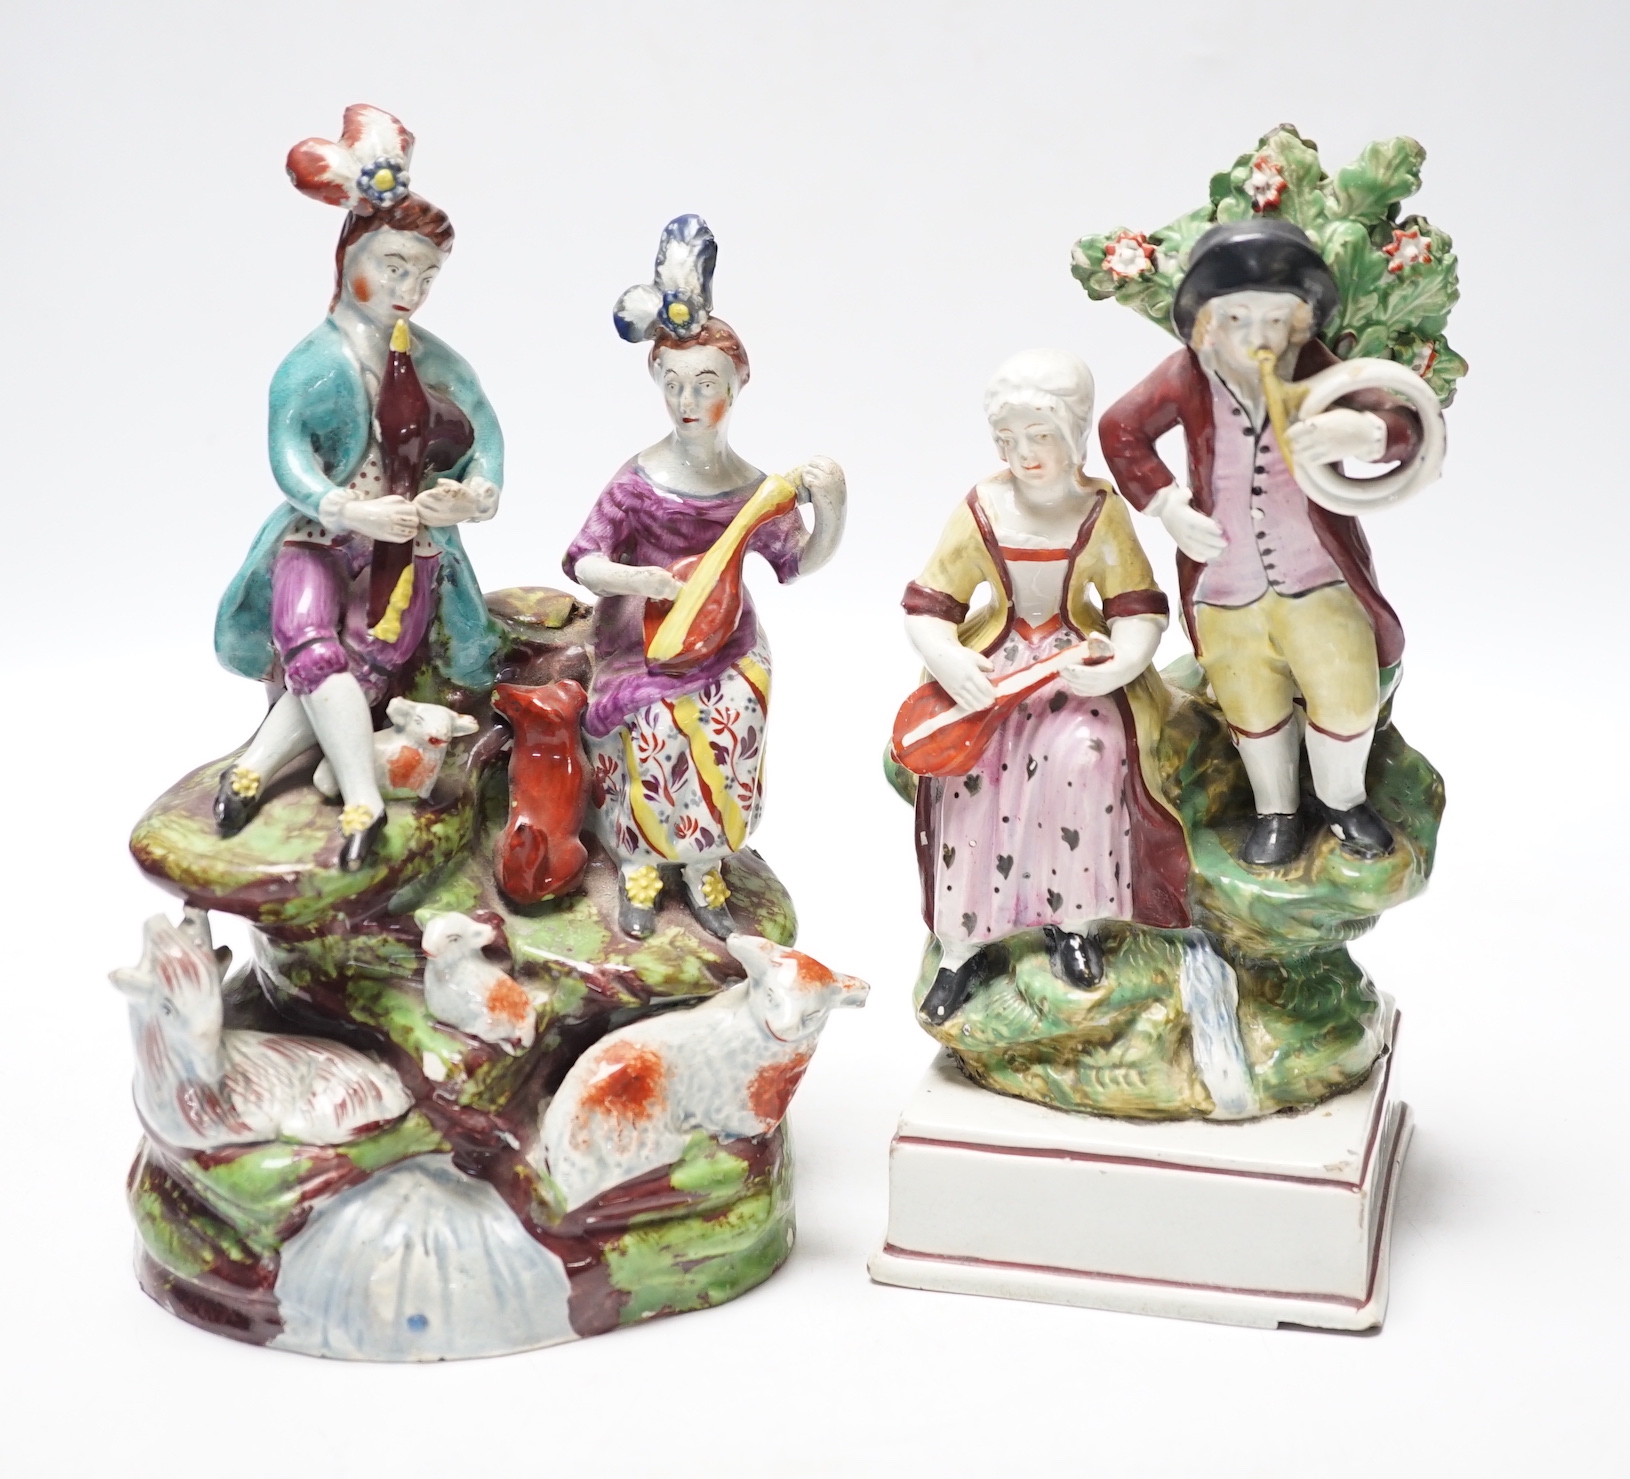 Two Staffordshire pearlware groups of musicians, c.1810-25, largest 20cm high